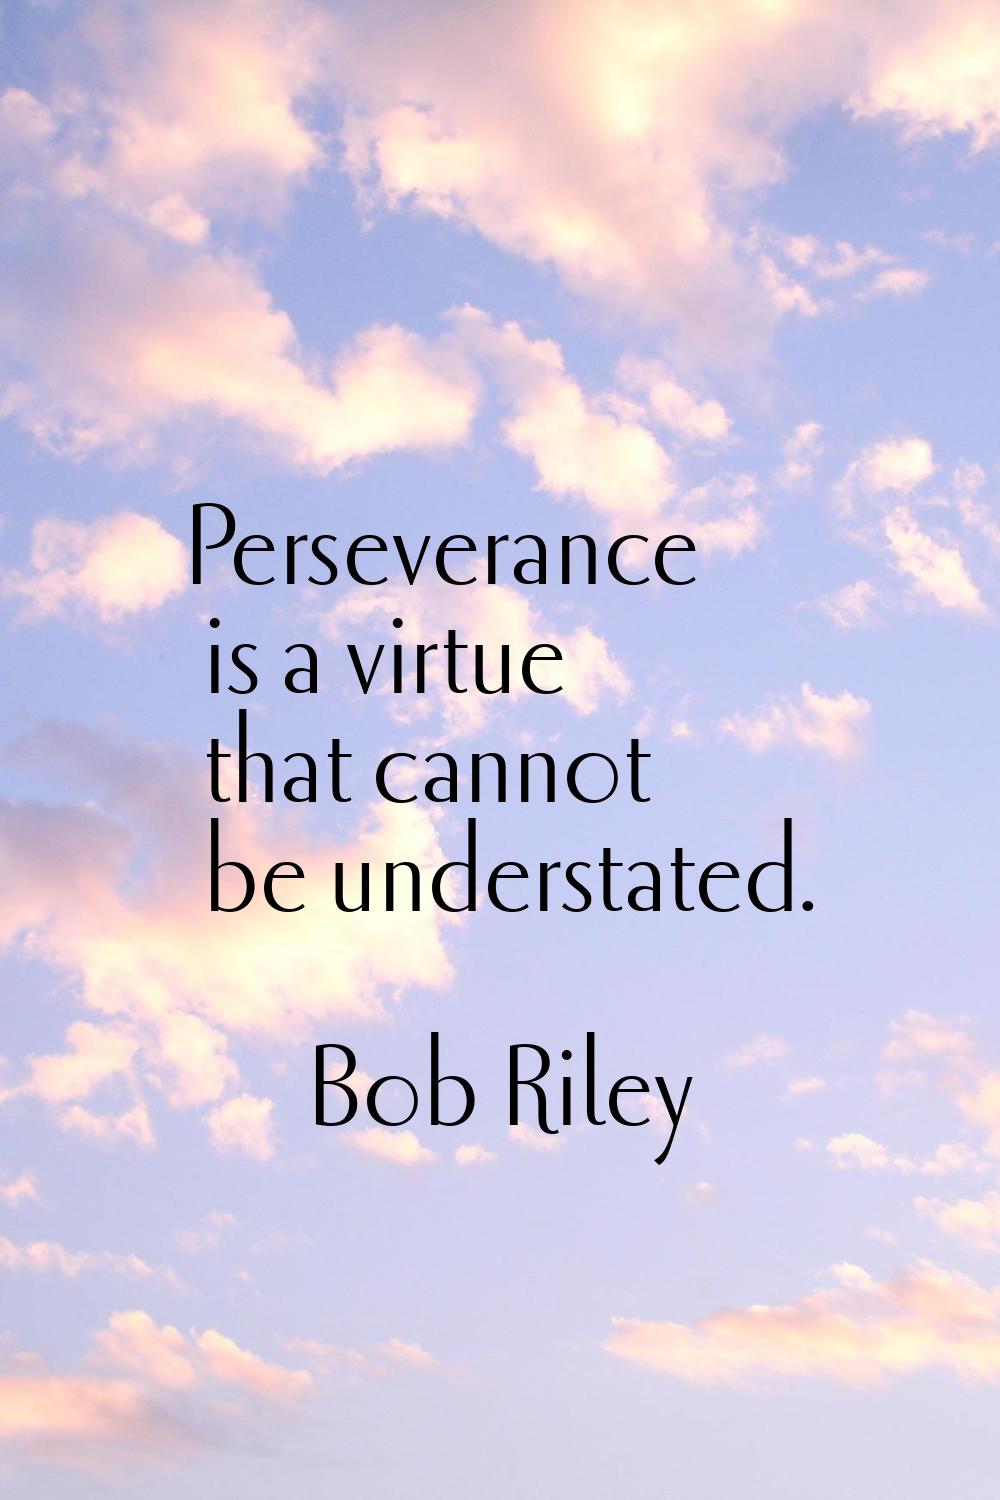 Perseverance is a virtue that cannot be understated.